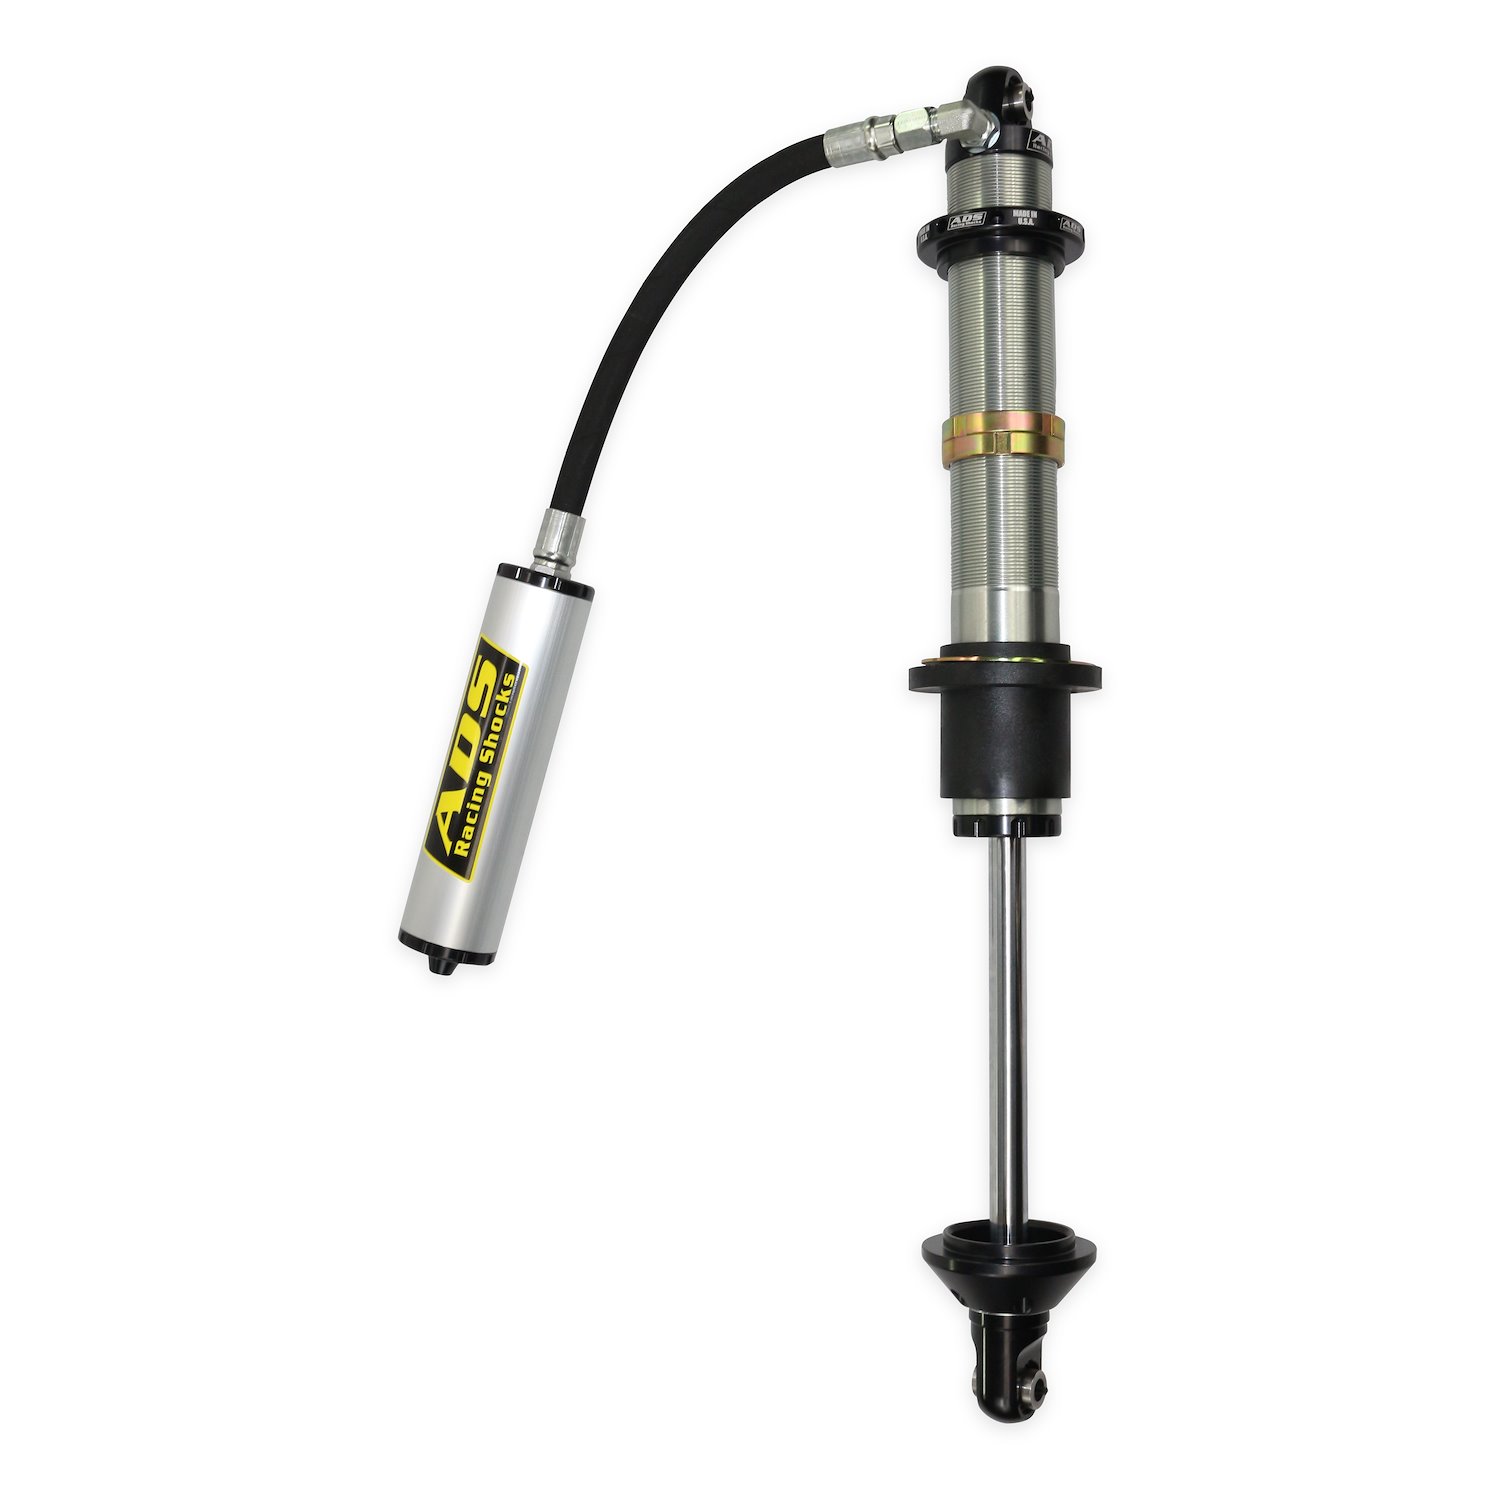 250-COR10-900-BPV 2.5 in. x 10 in. Stroke Coil-Over Race Shock w/ Remote Reservoir (90-Degree Hose), Bypass Valving